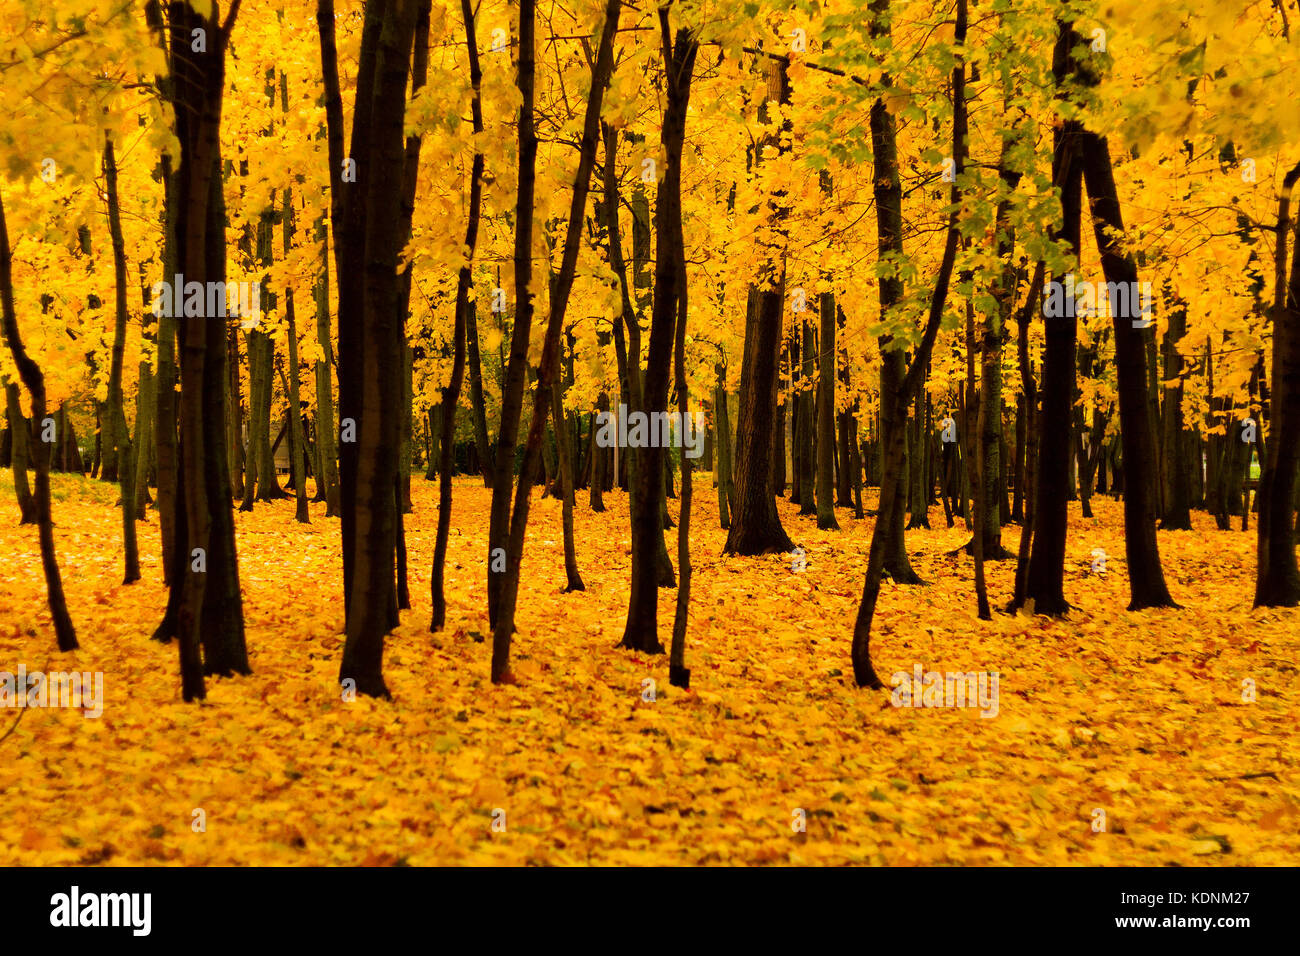 Maple trees in a park by an autumn day with yellow leaves, dark trunks and ground around covered by foliage. Stock Photo